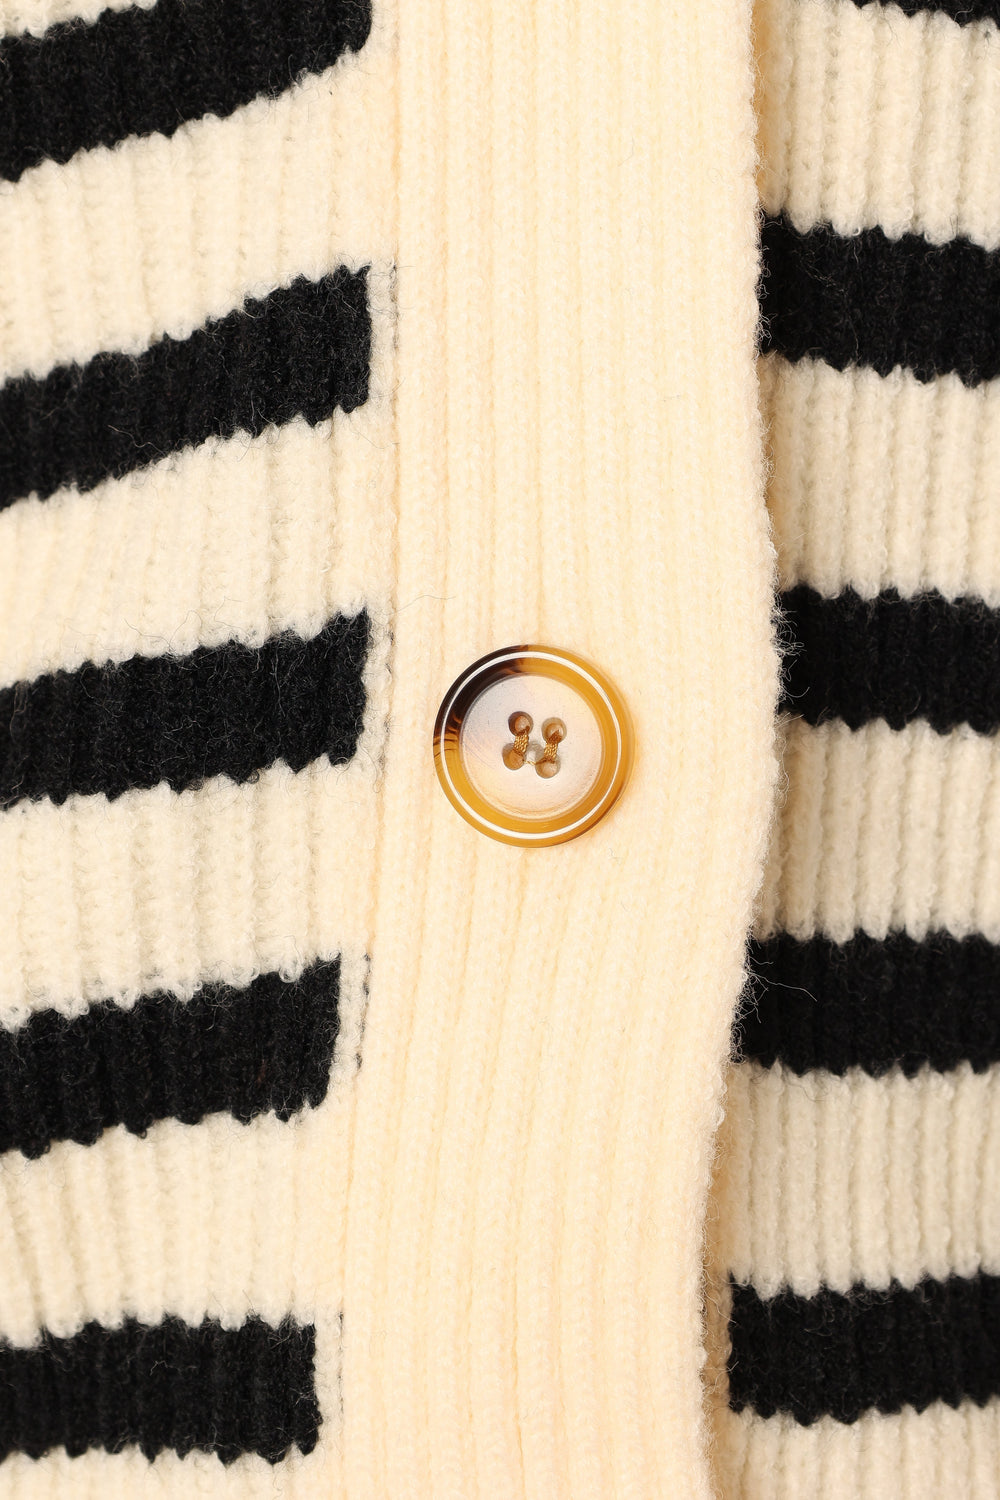 Petal and Pup USA KNITWEAR Sapphire Striped Button Front Cardigan - Beige Black